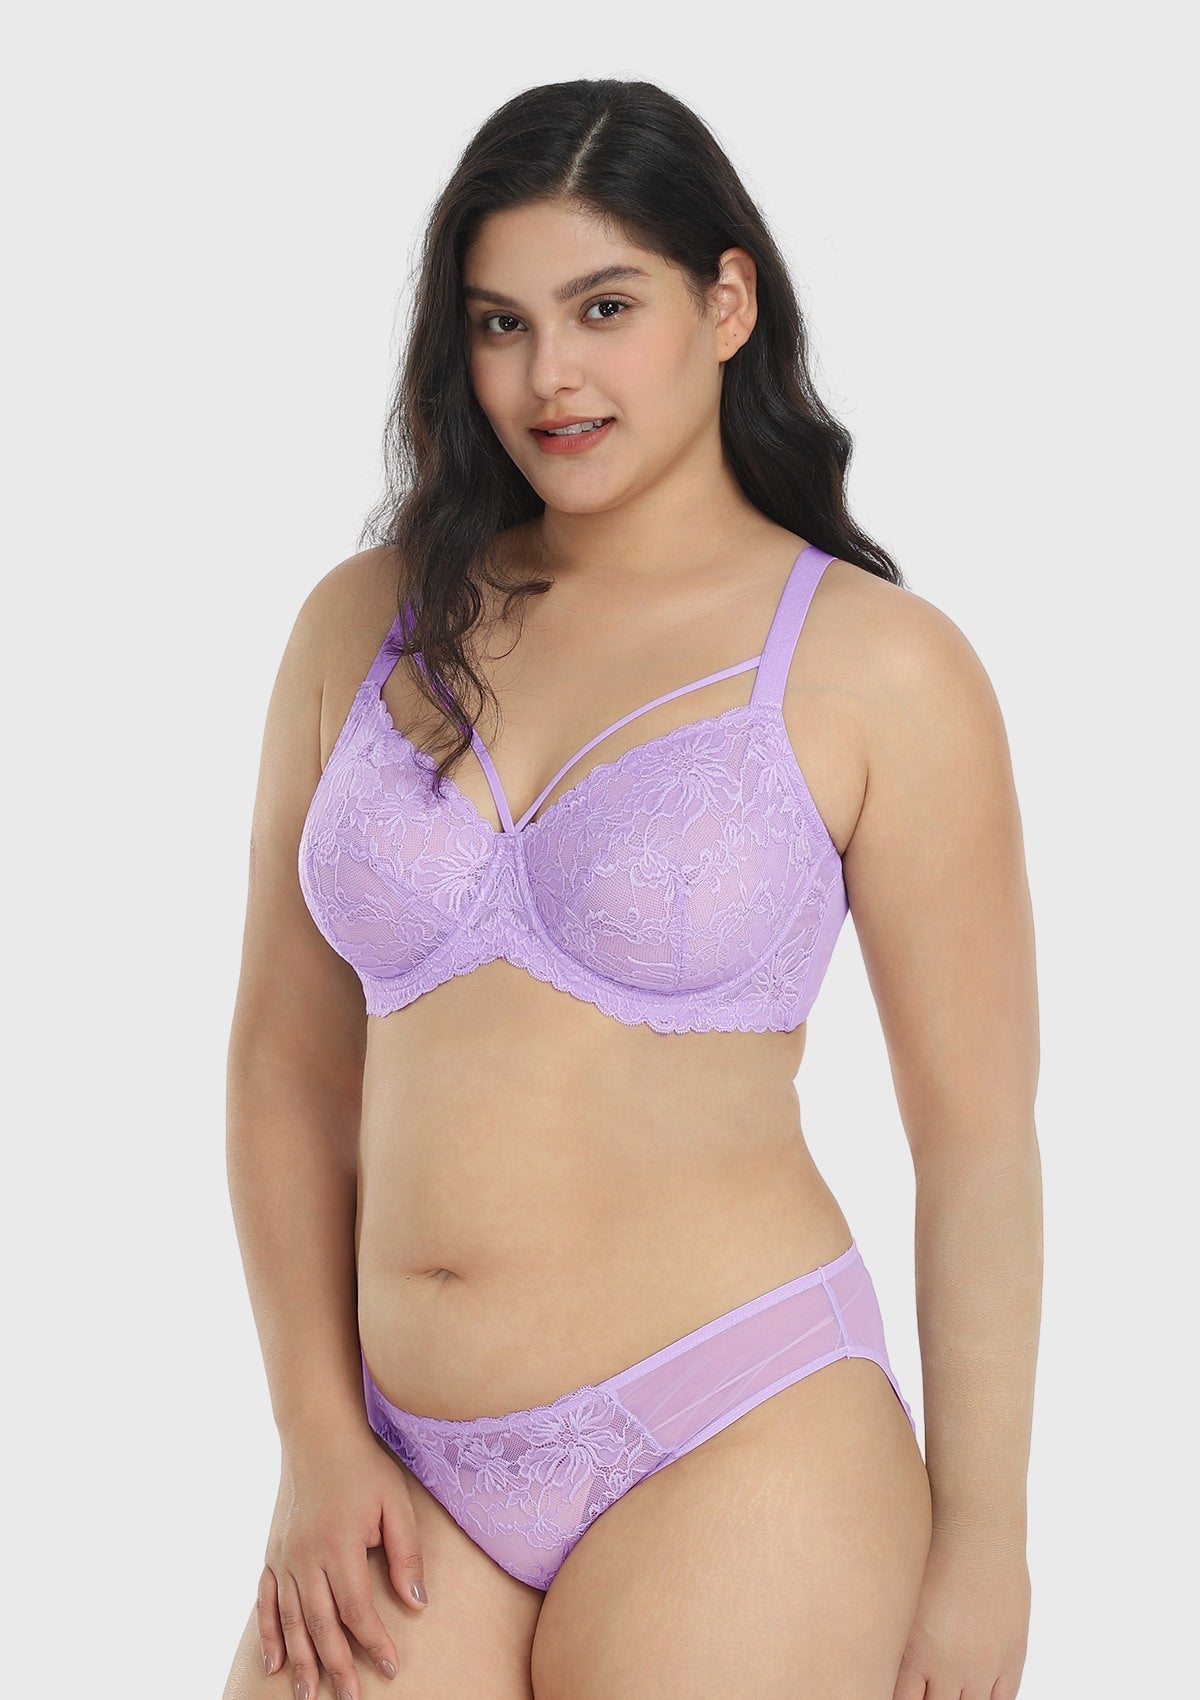 HSIA Pretty In Petals See-Through Lace Bra: Lift And Separate - Light Gray / 34 / D